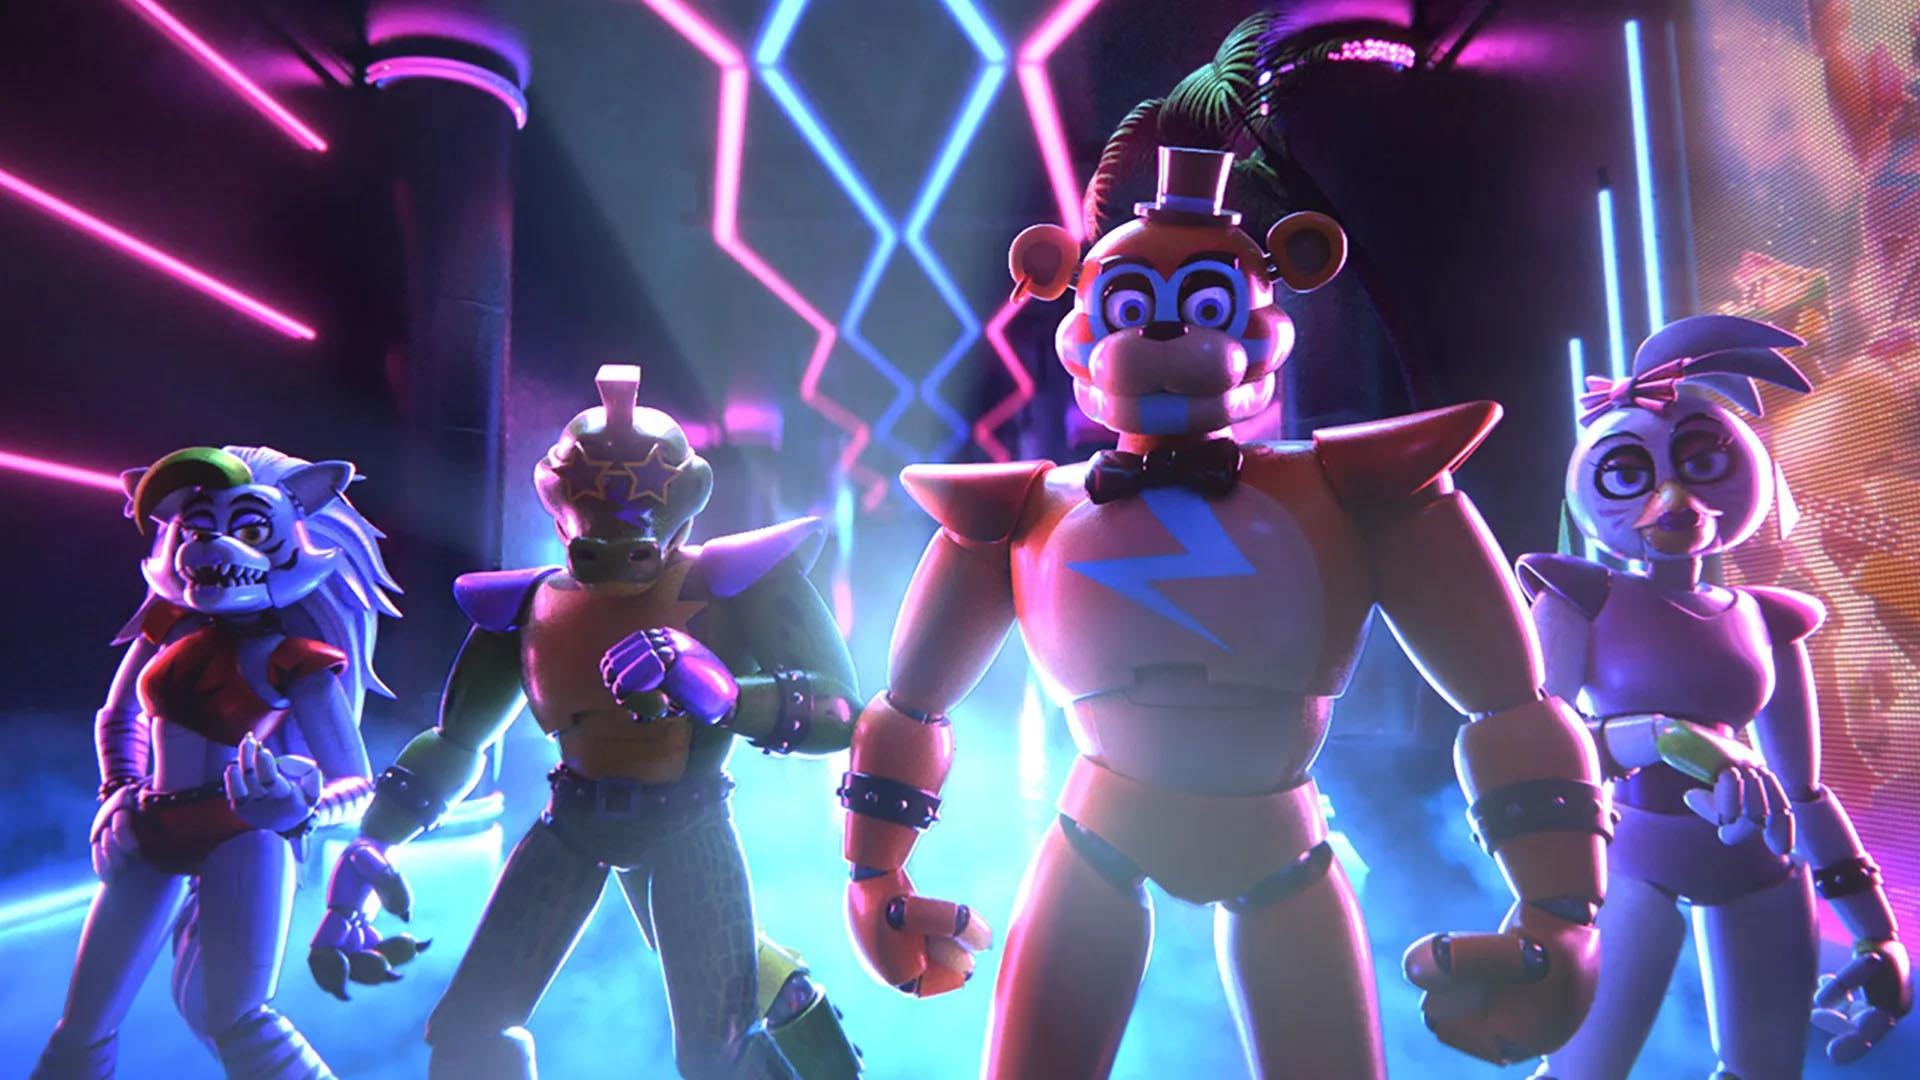 Five nights at Freddys: Security Breach opens December 16th News 24